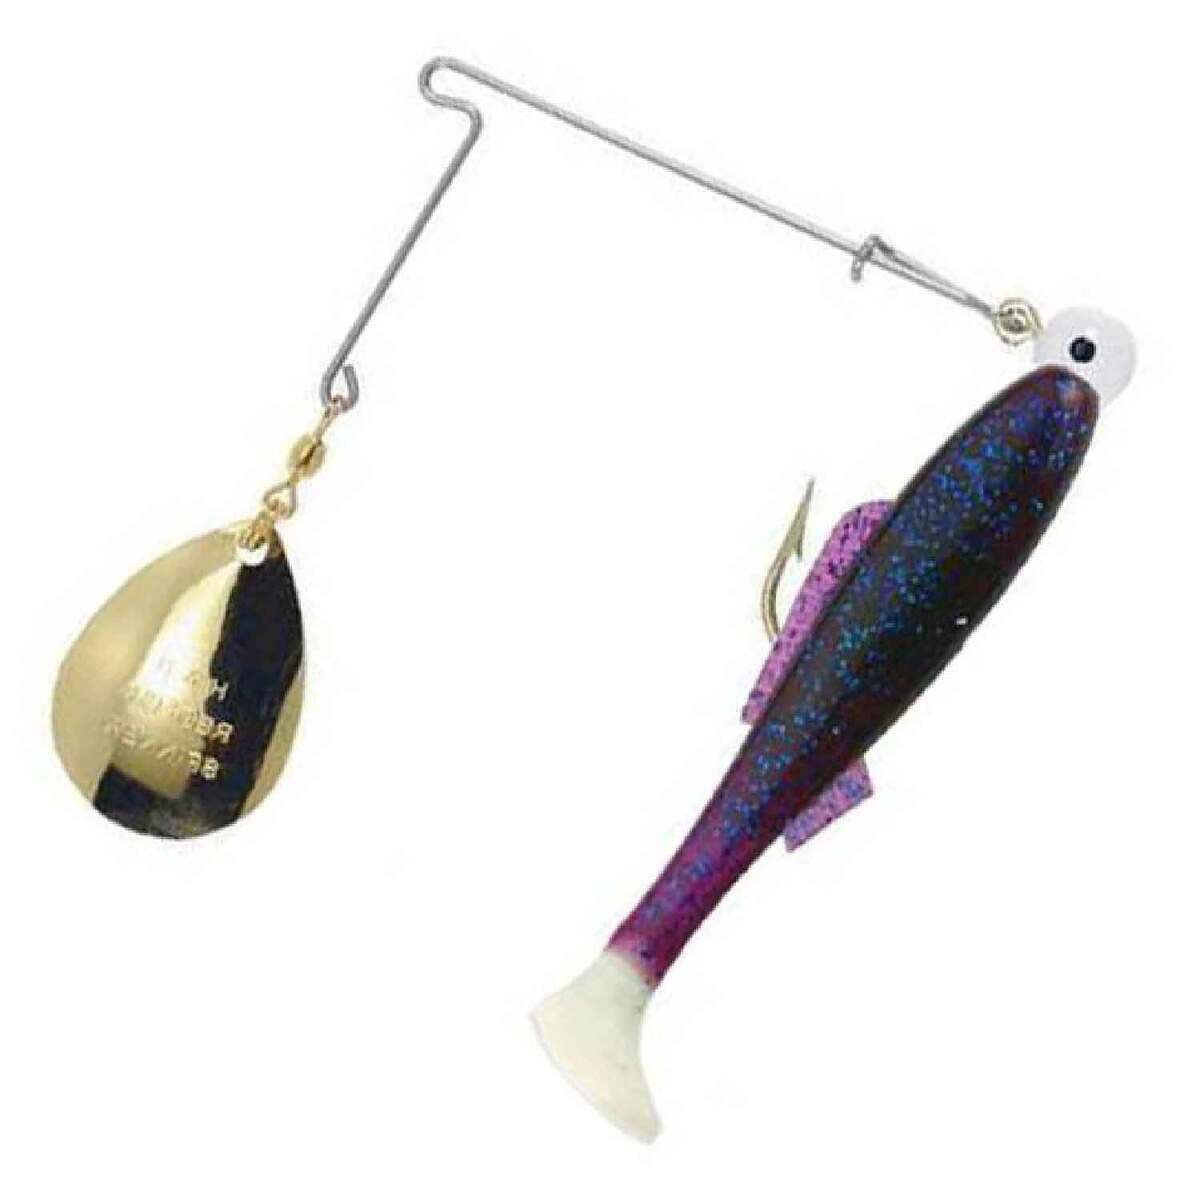 H&H Cocahoe Minnow Jig Spin - Plum/ Chartreuse Tail